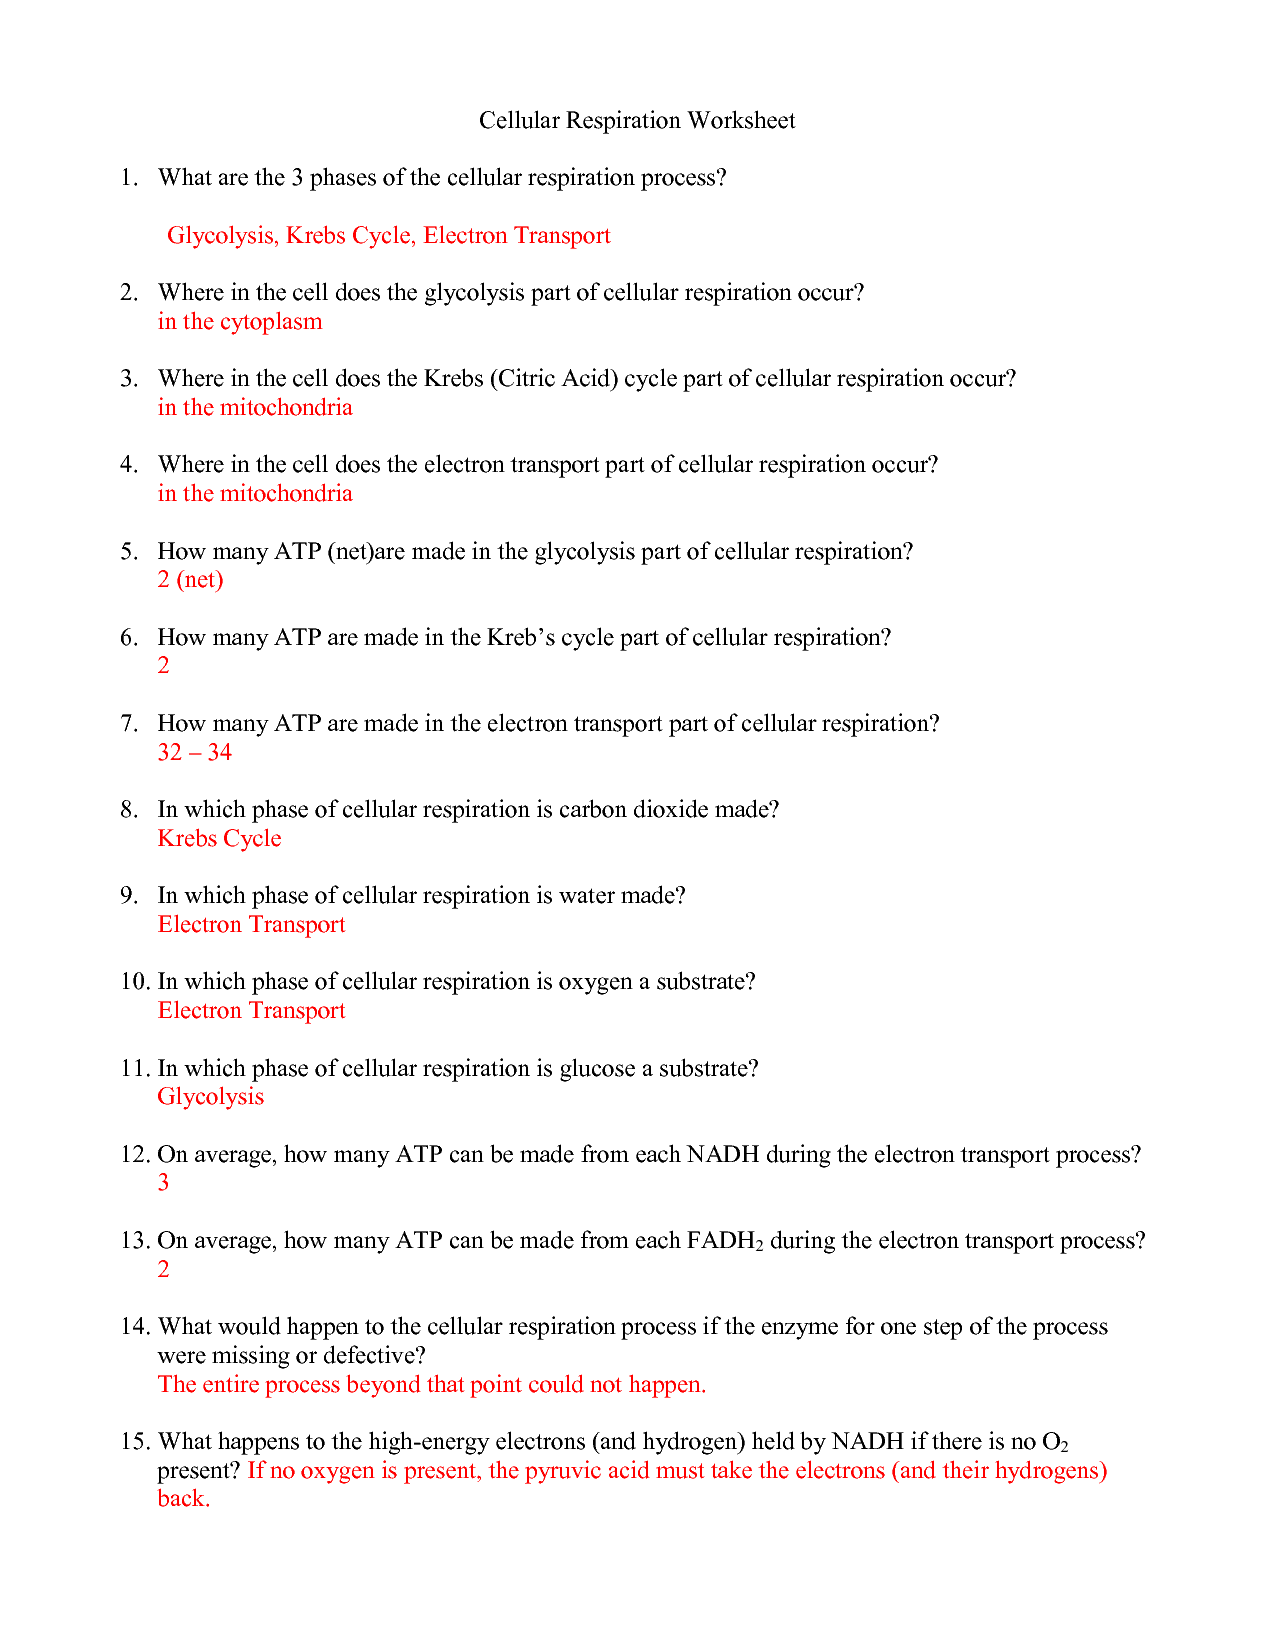 15 Best Images Of Chapter 9 Cellular Respiration Worksheet Cellular Respiration Worksheet 